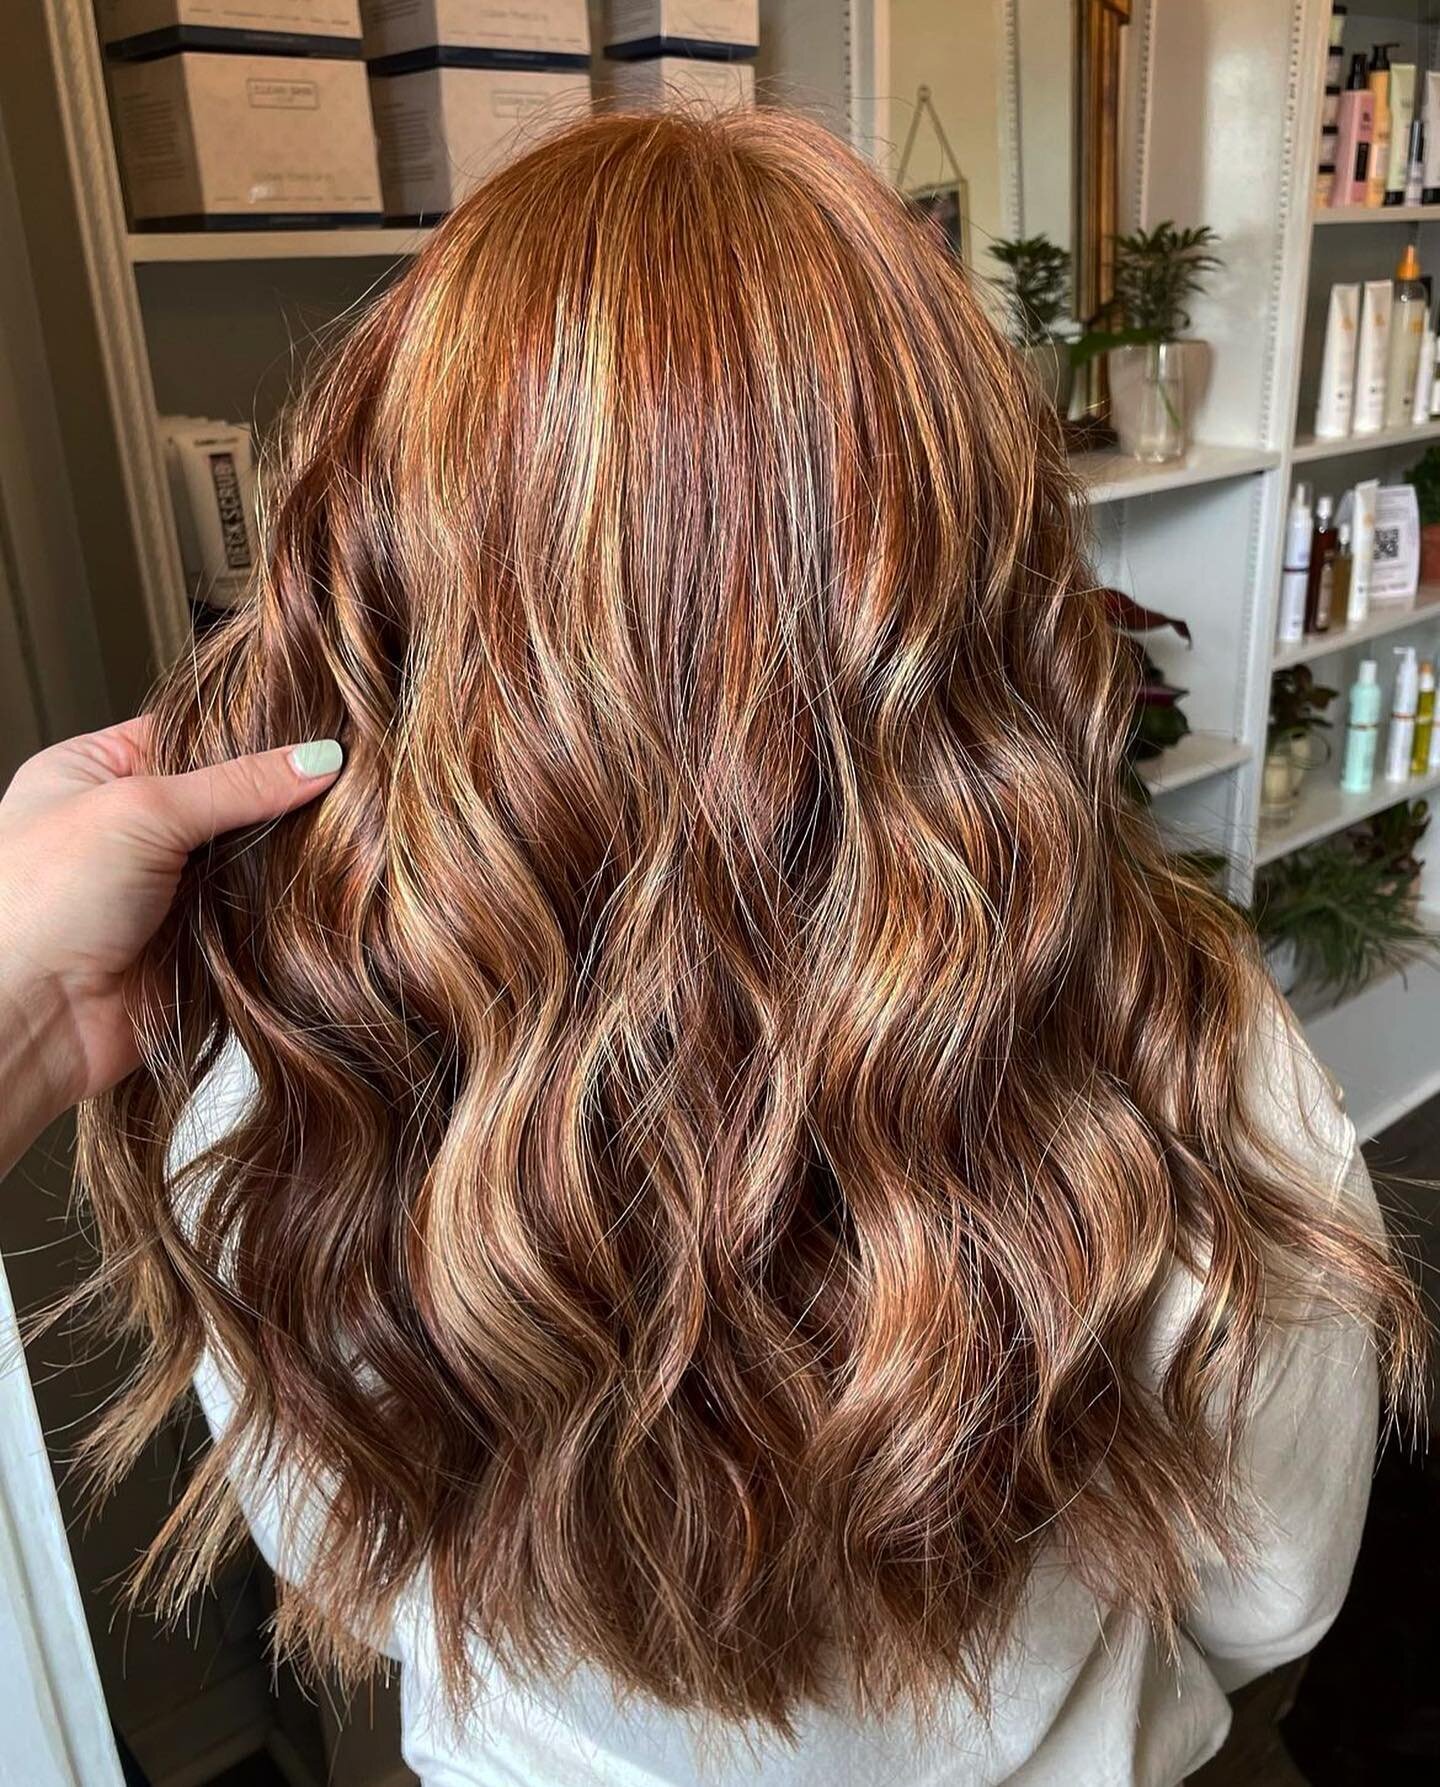 this mane is insane 😍🦁 

stylist: @burgins.beauty 

Book an appt with Burgin using Vagaro! You can find the link in our bio 📲